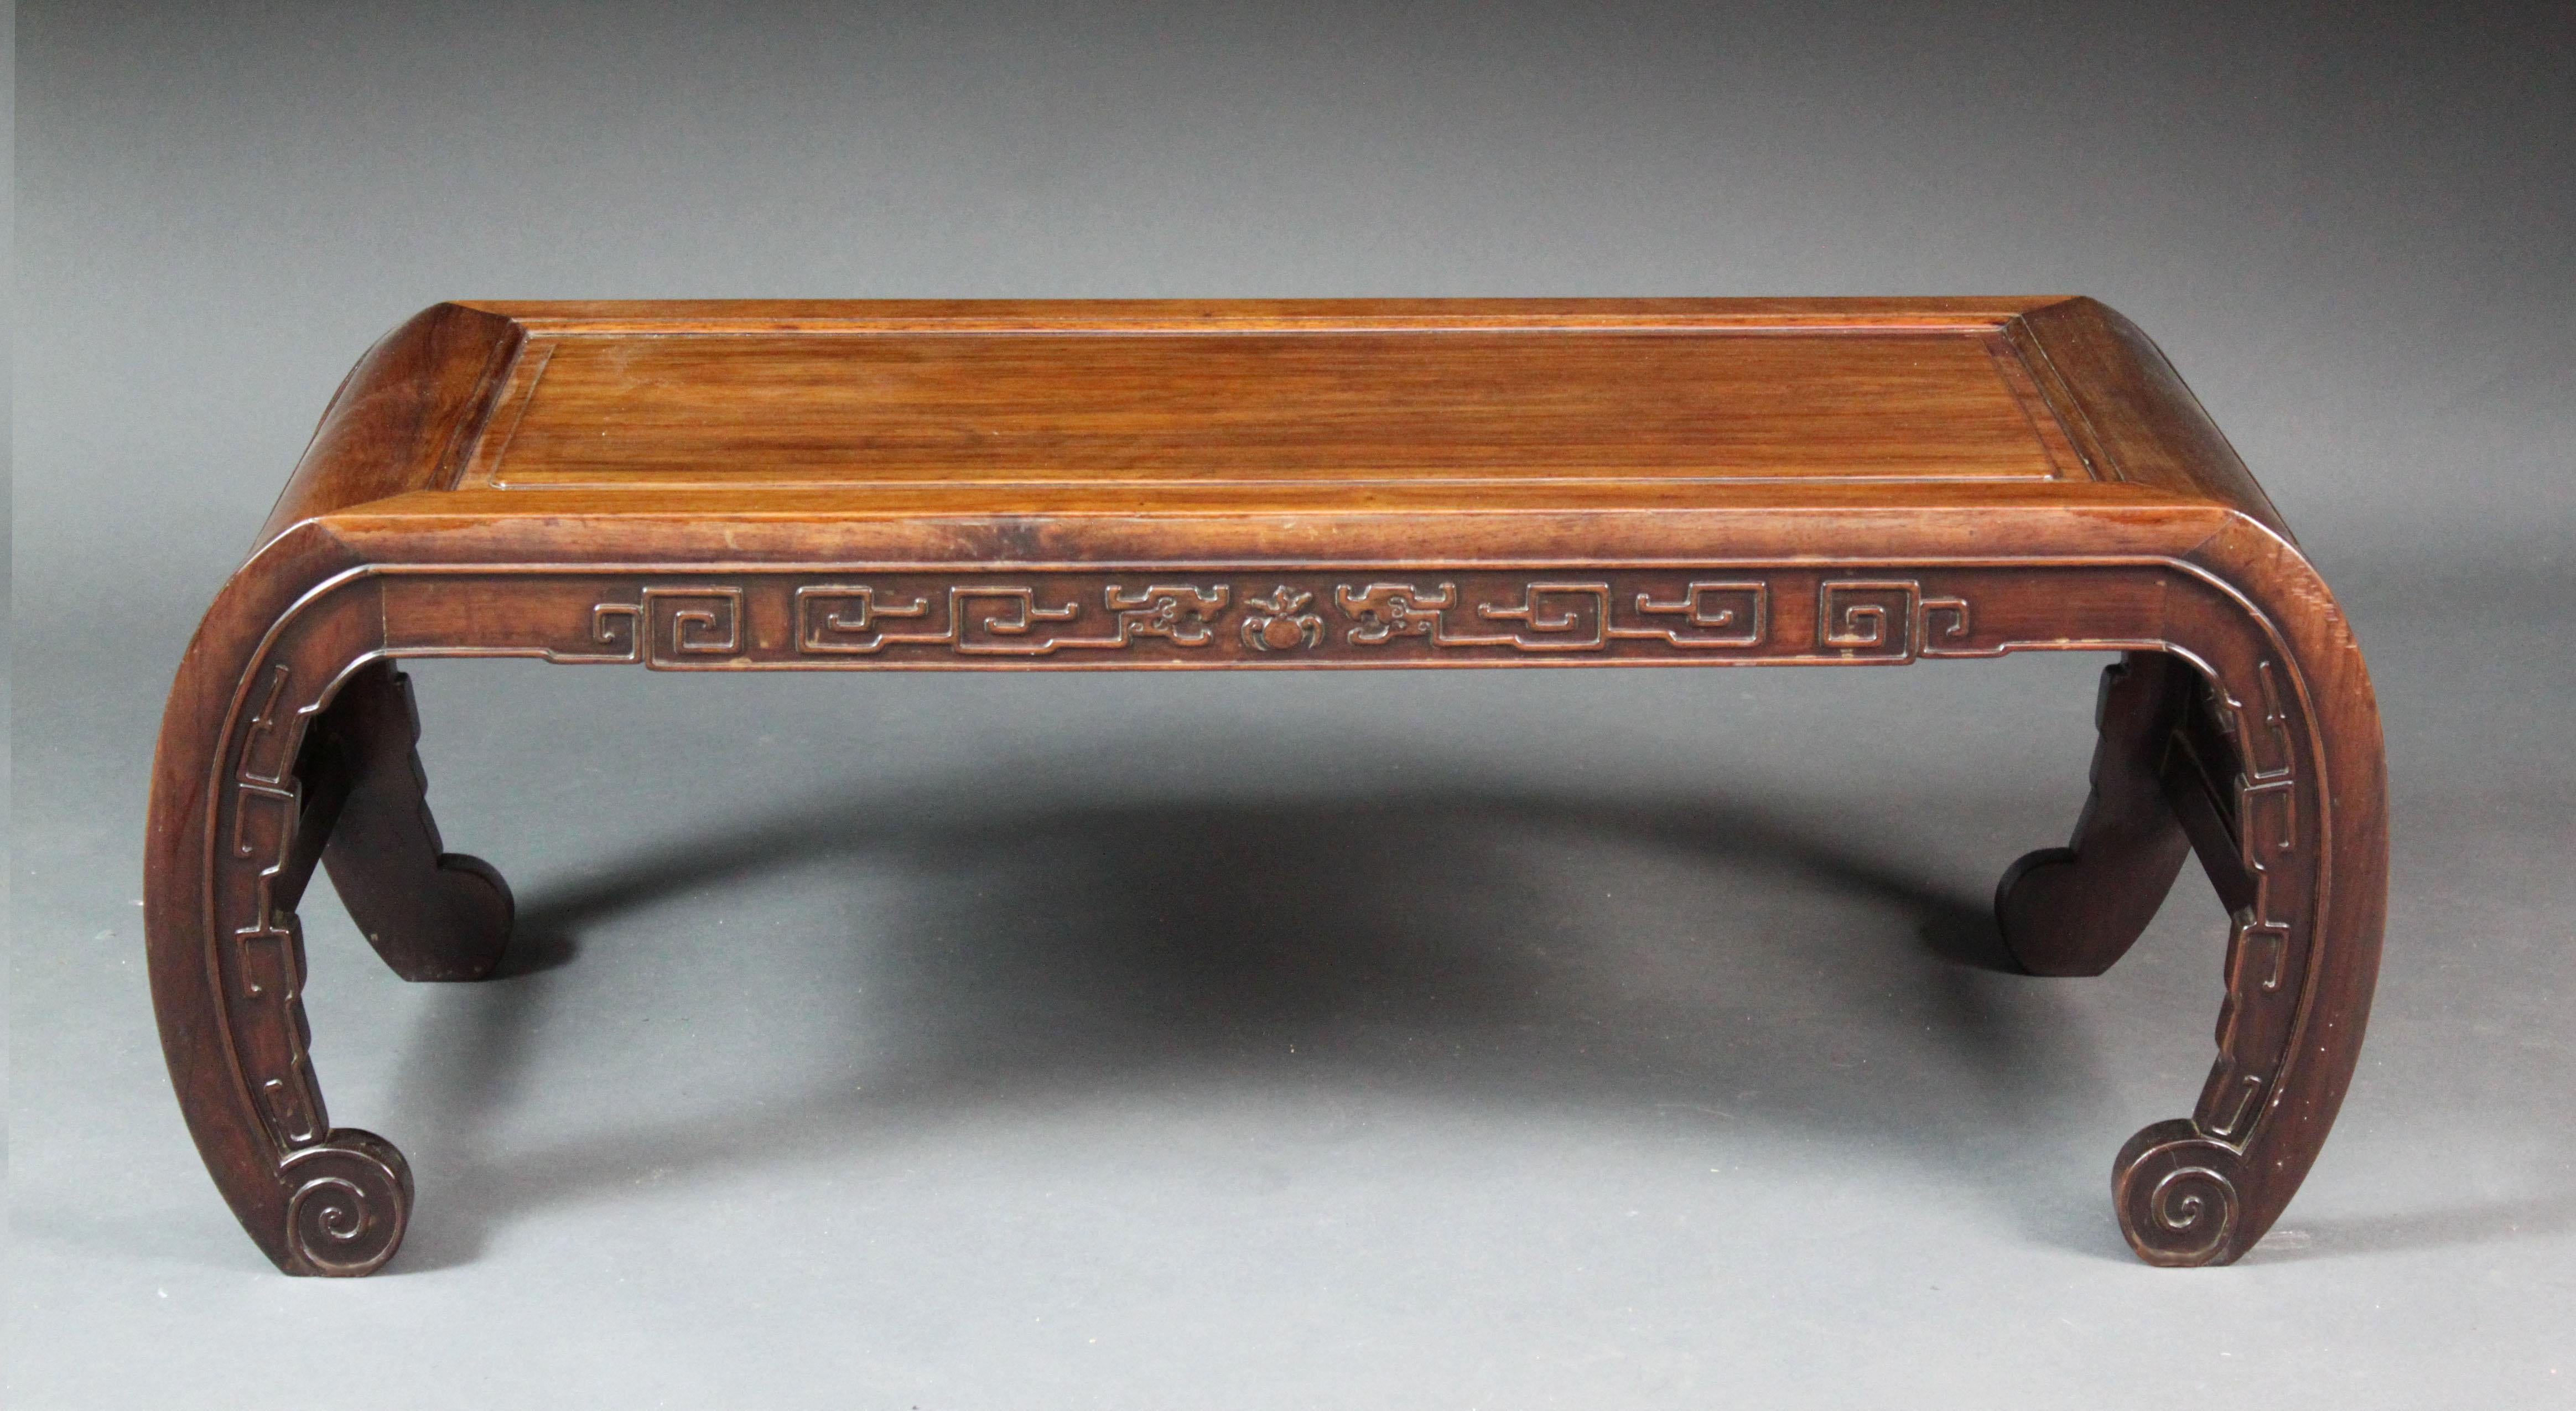 Antique Opium Coffee Table - 8 For Sale on 1stDibs